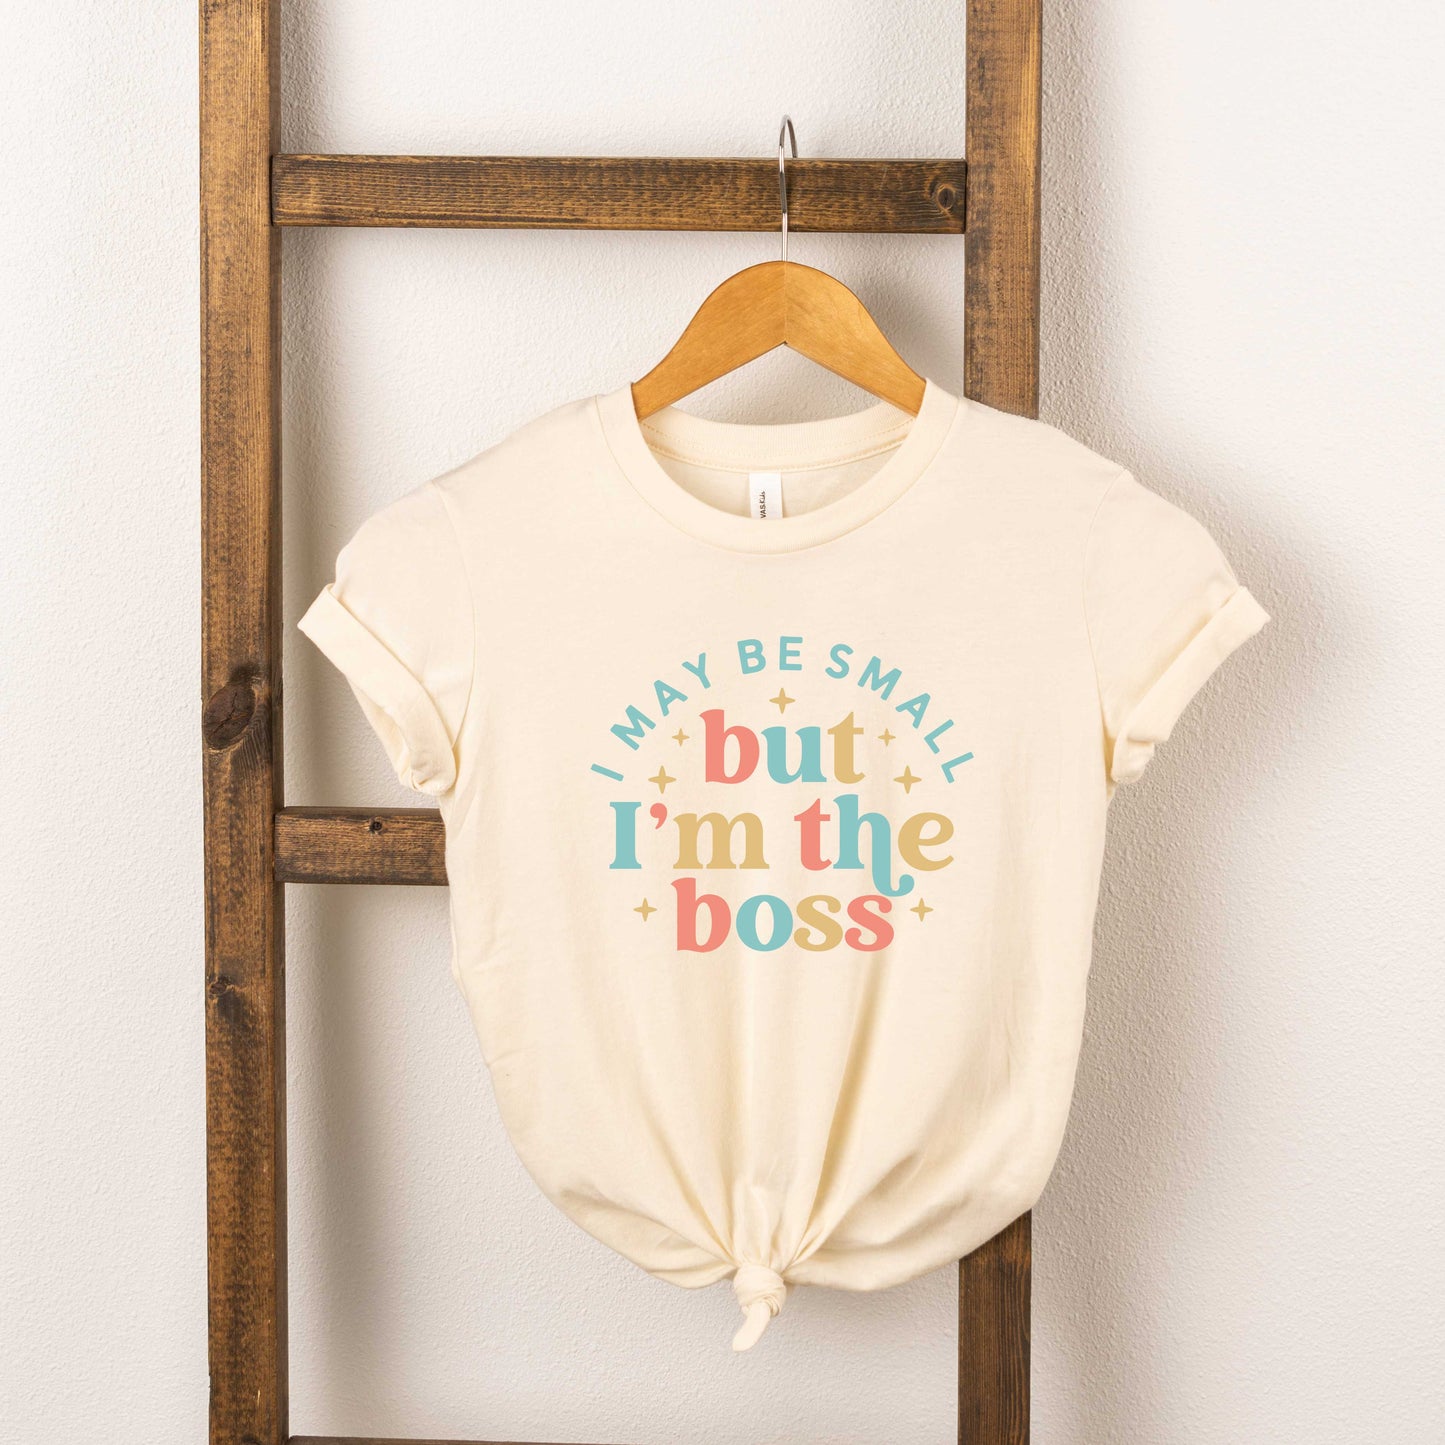 I'm The Boss Colorful | Toddler Short Sleeve Crew Neck